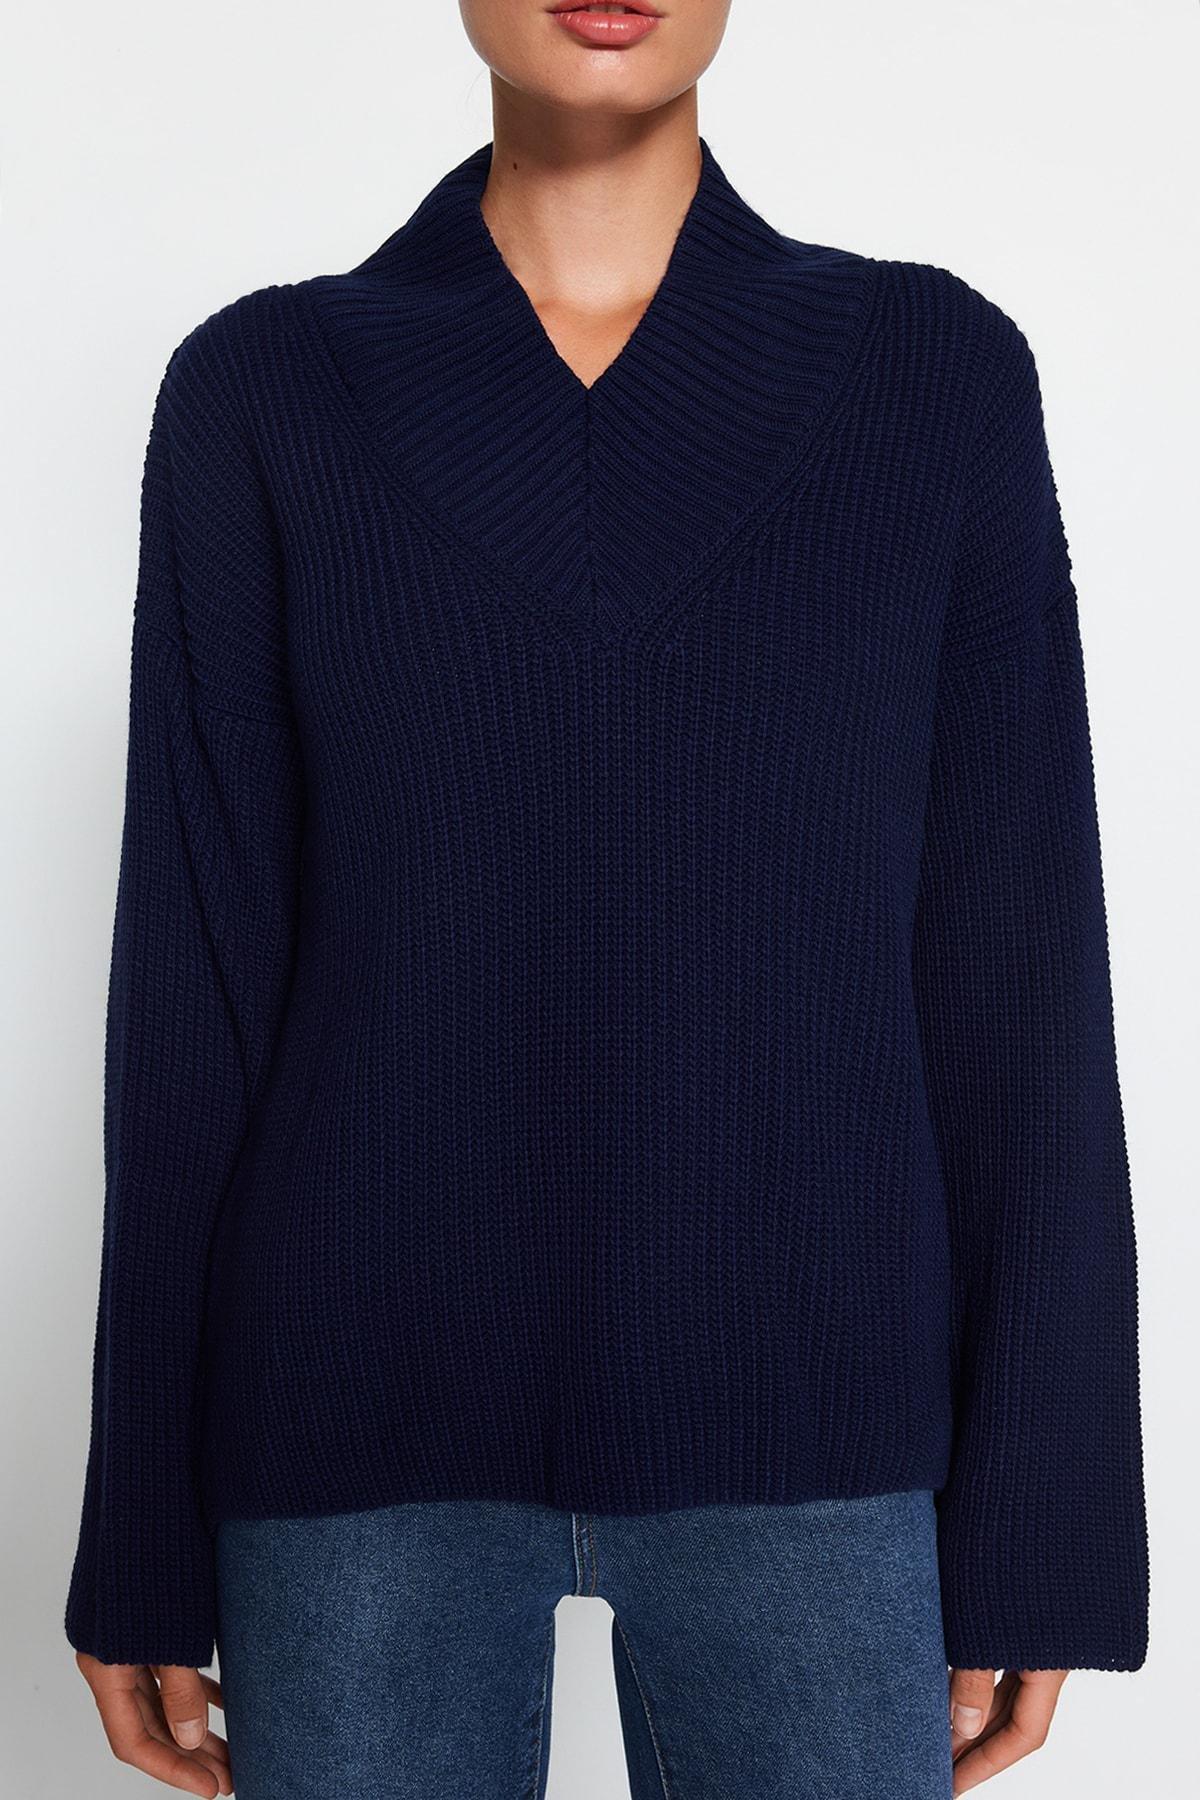 Trendyol - Navy Wide Fit Knitted Sweater
